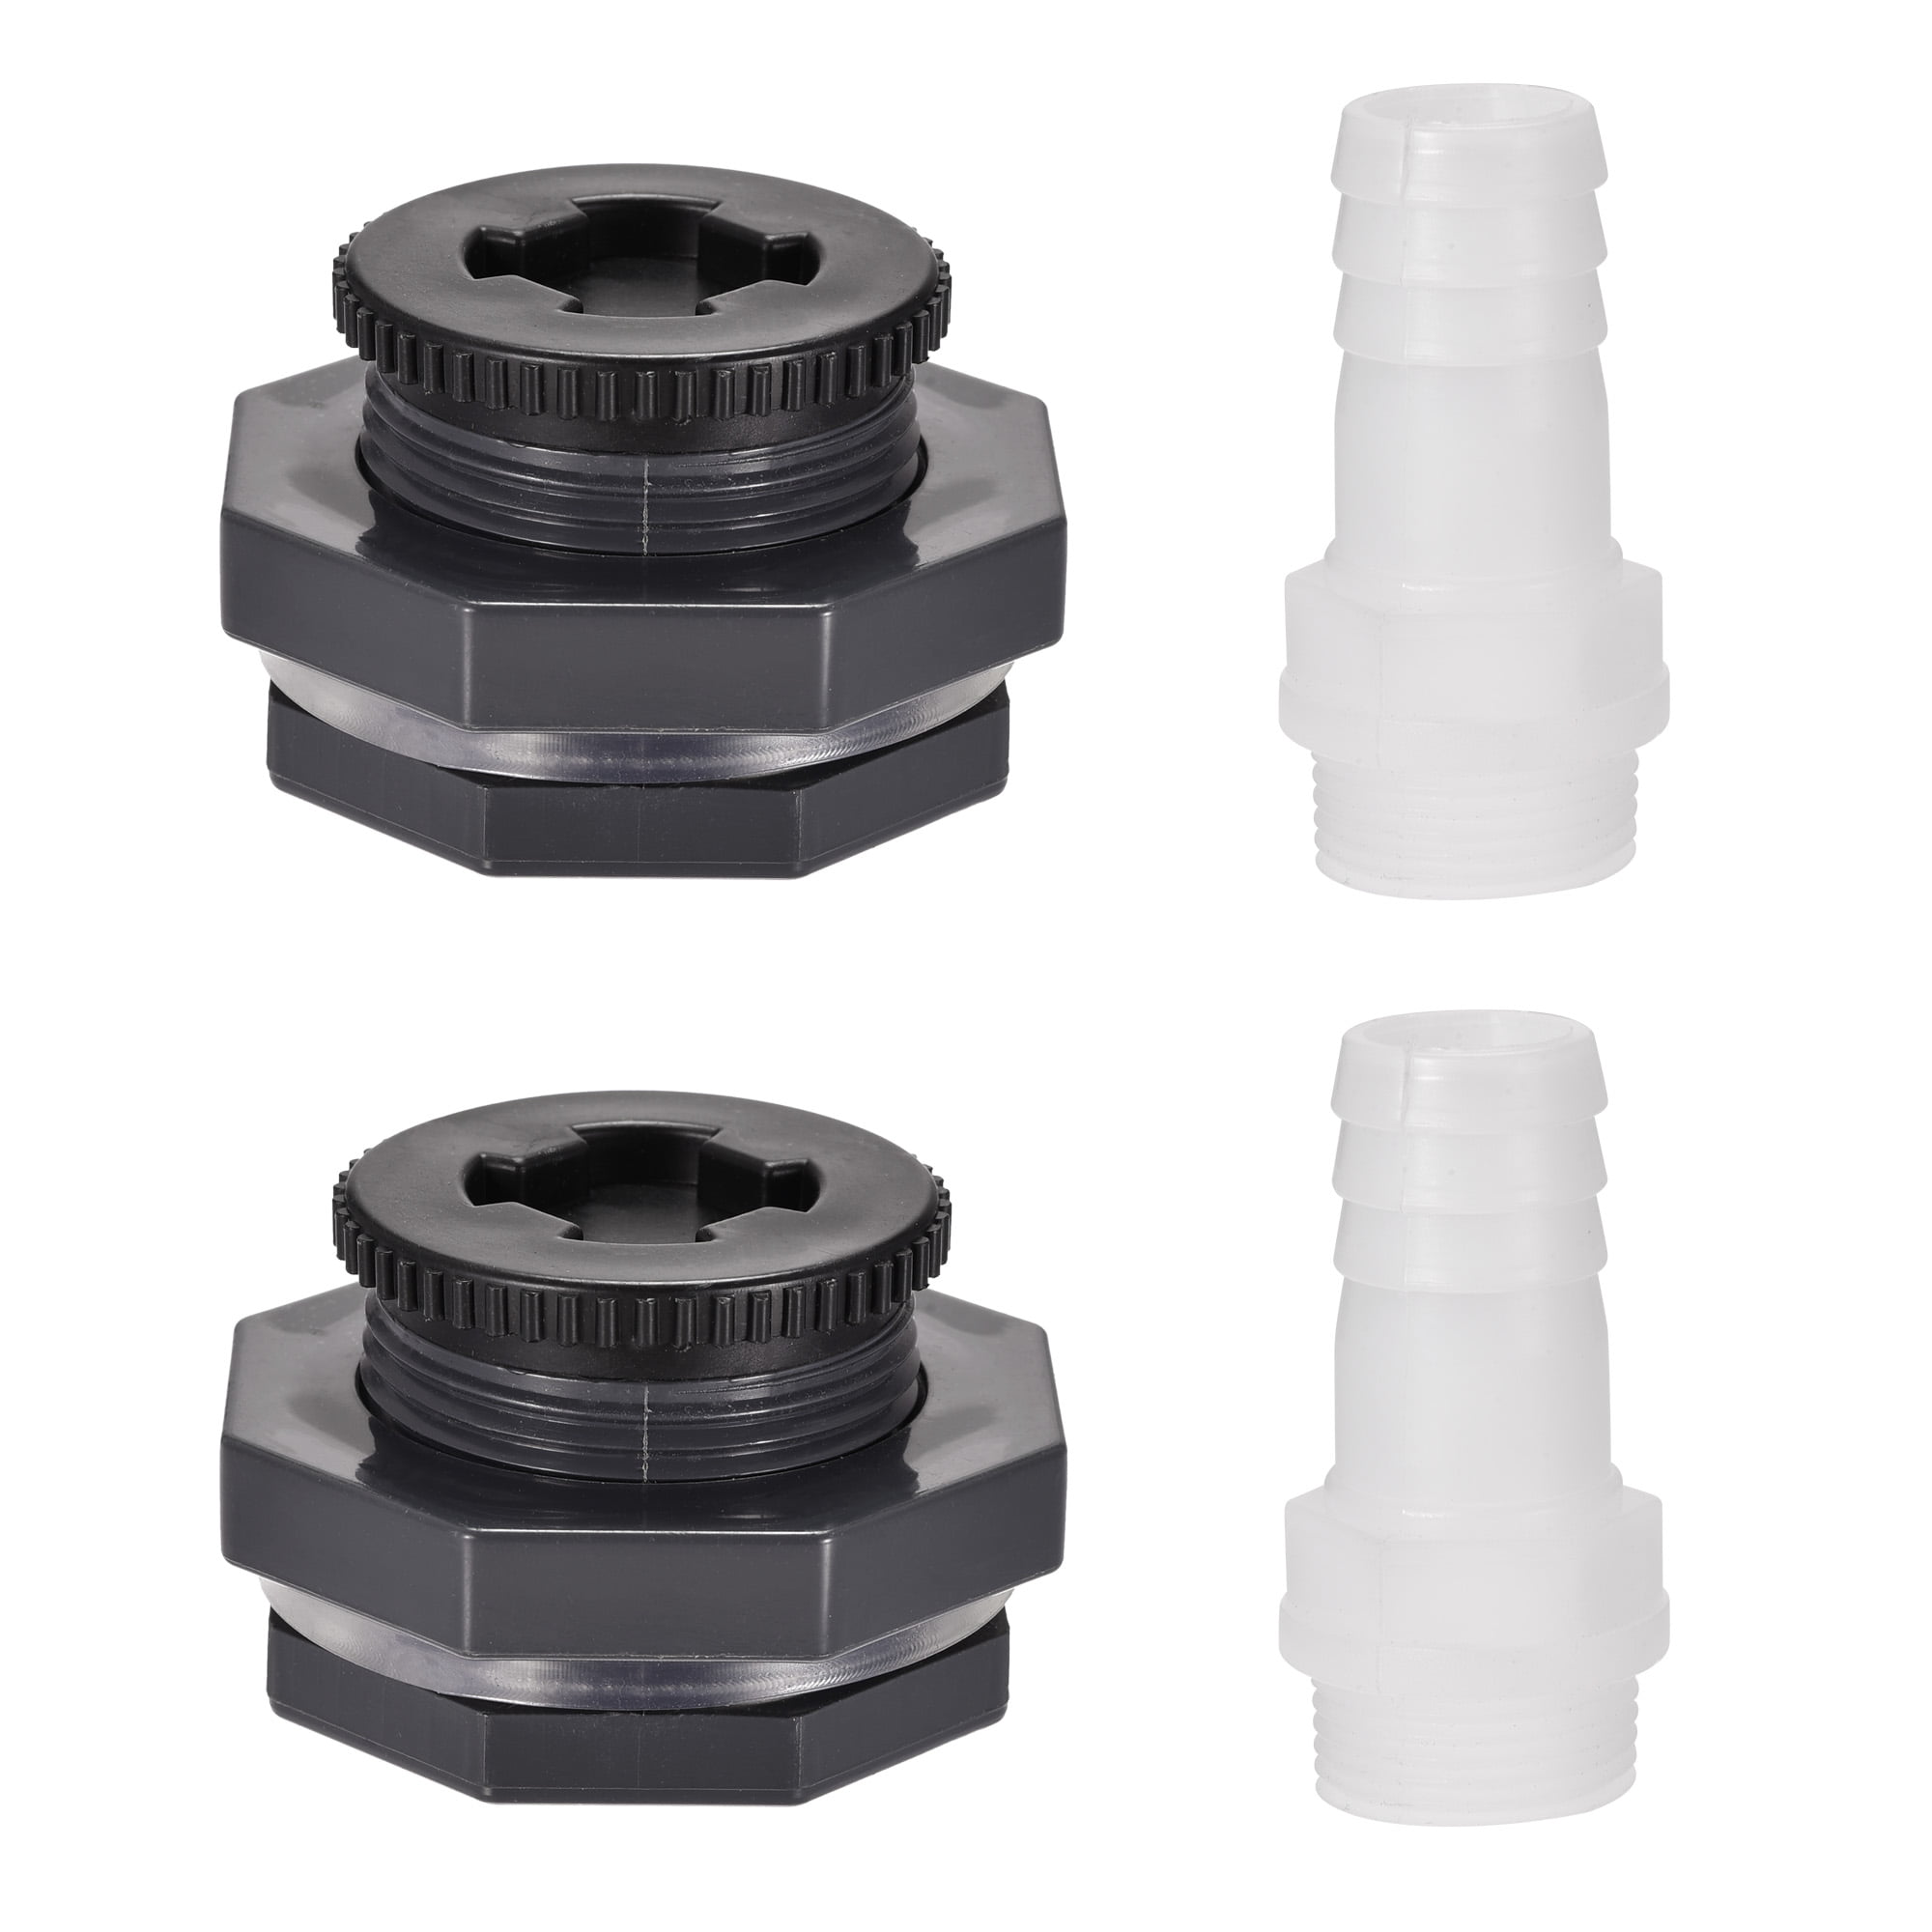 Uxcell G1 Thread PVC Tank Adapter with Plug Pipe Fitting Set - Walmart.com